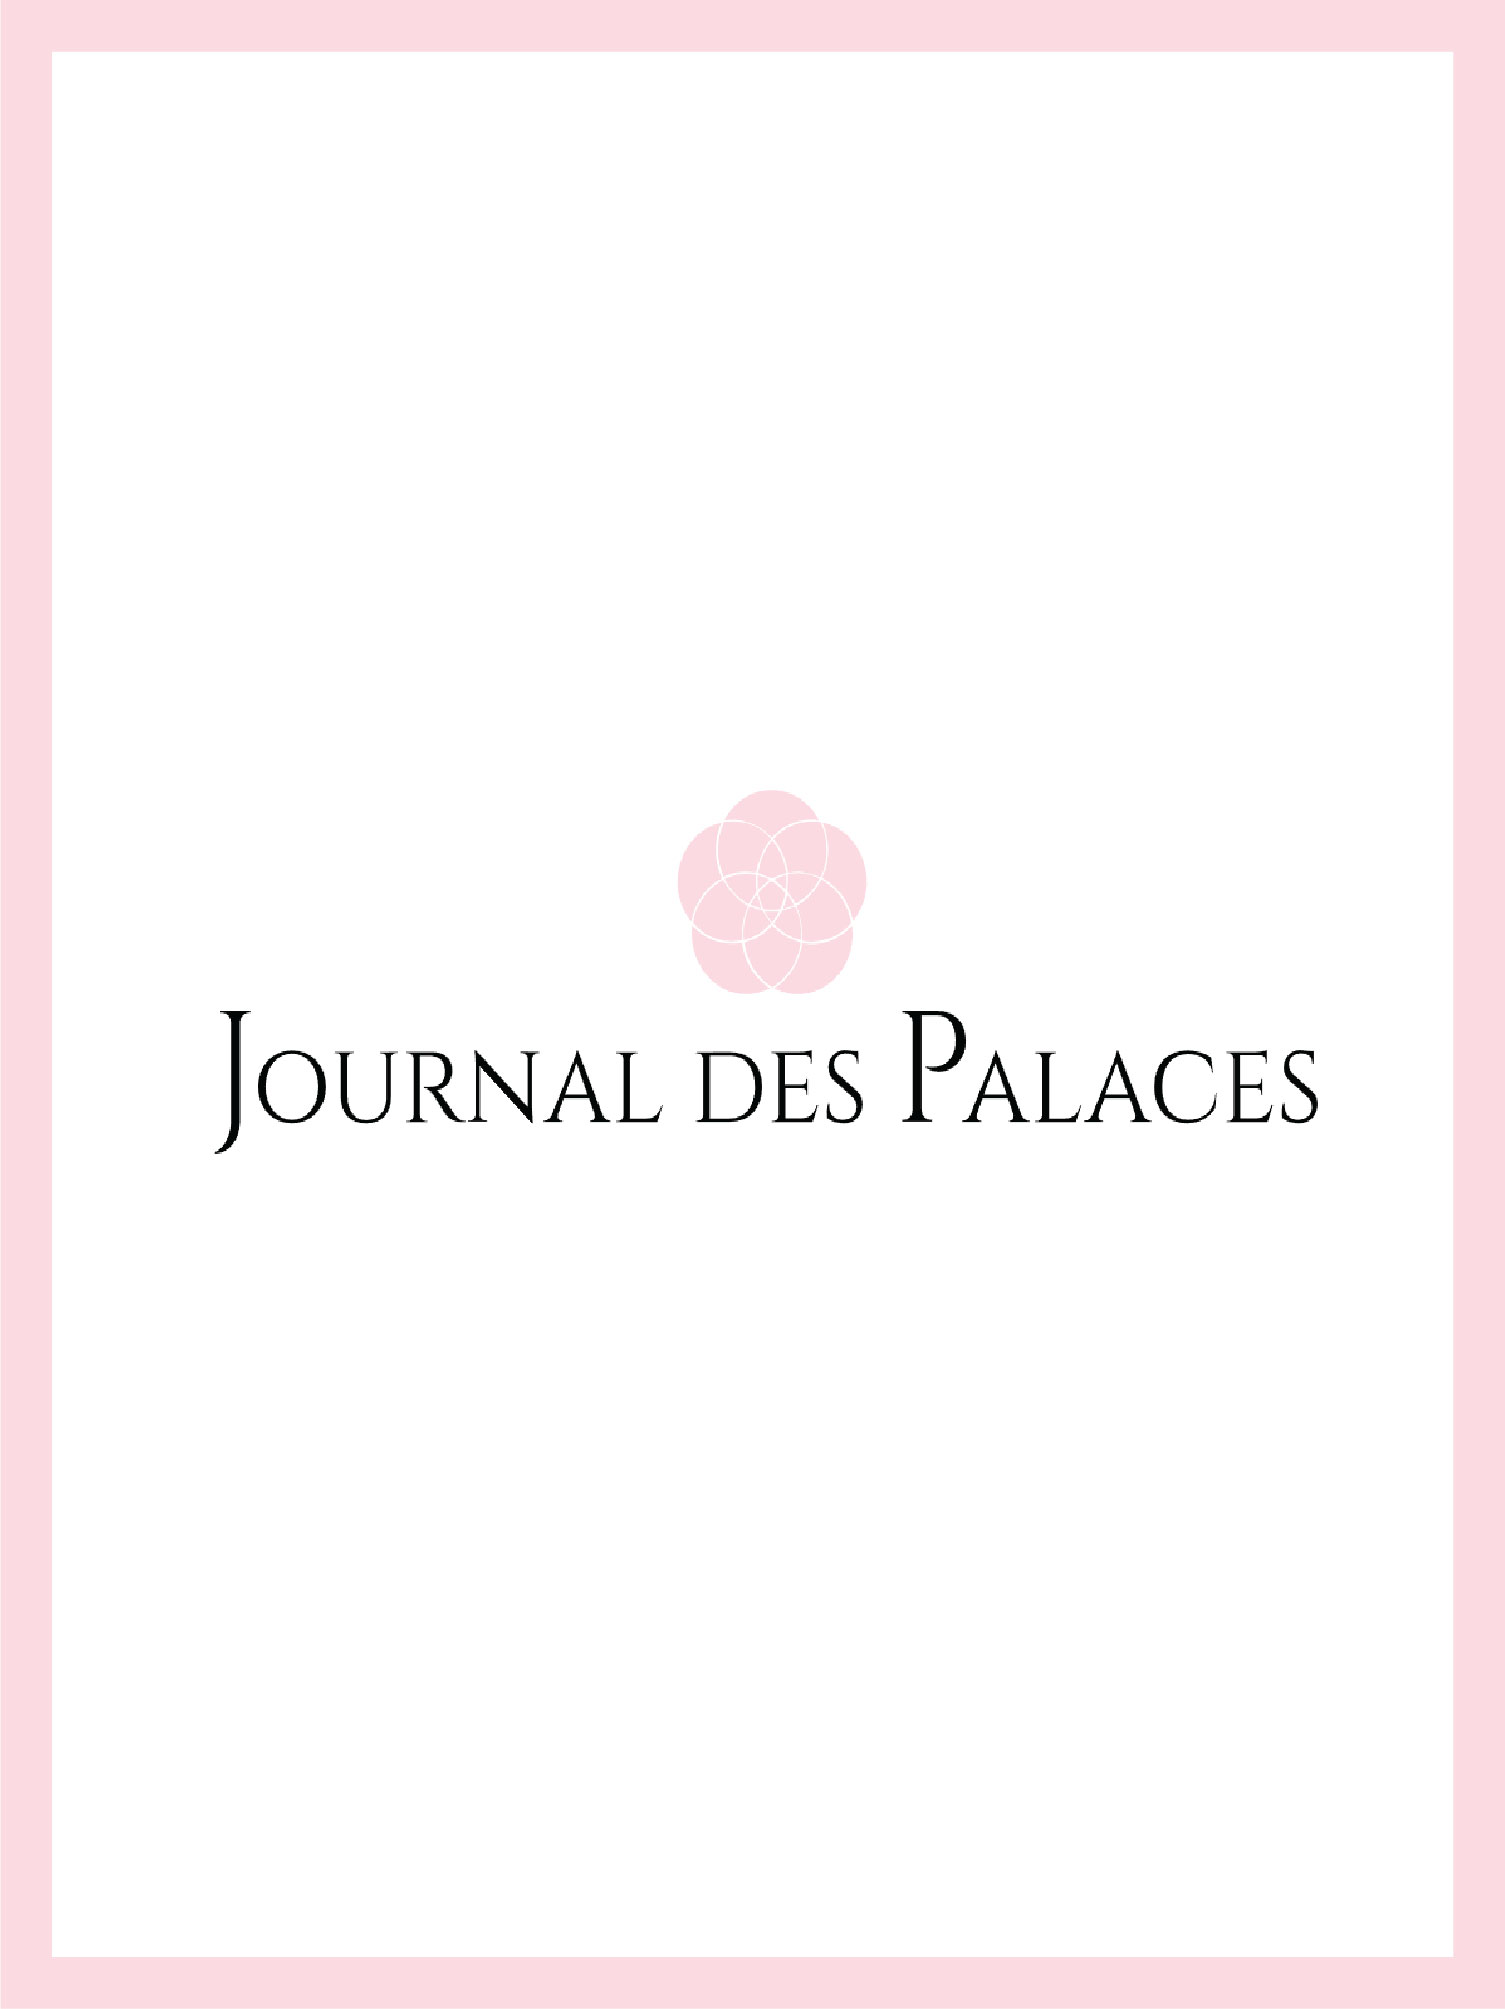 cover and logo le journal des palaces